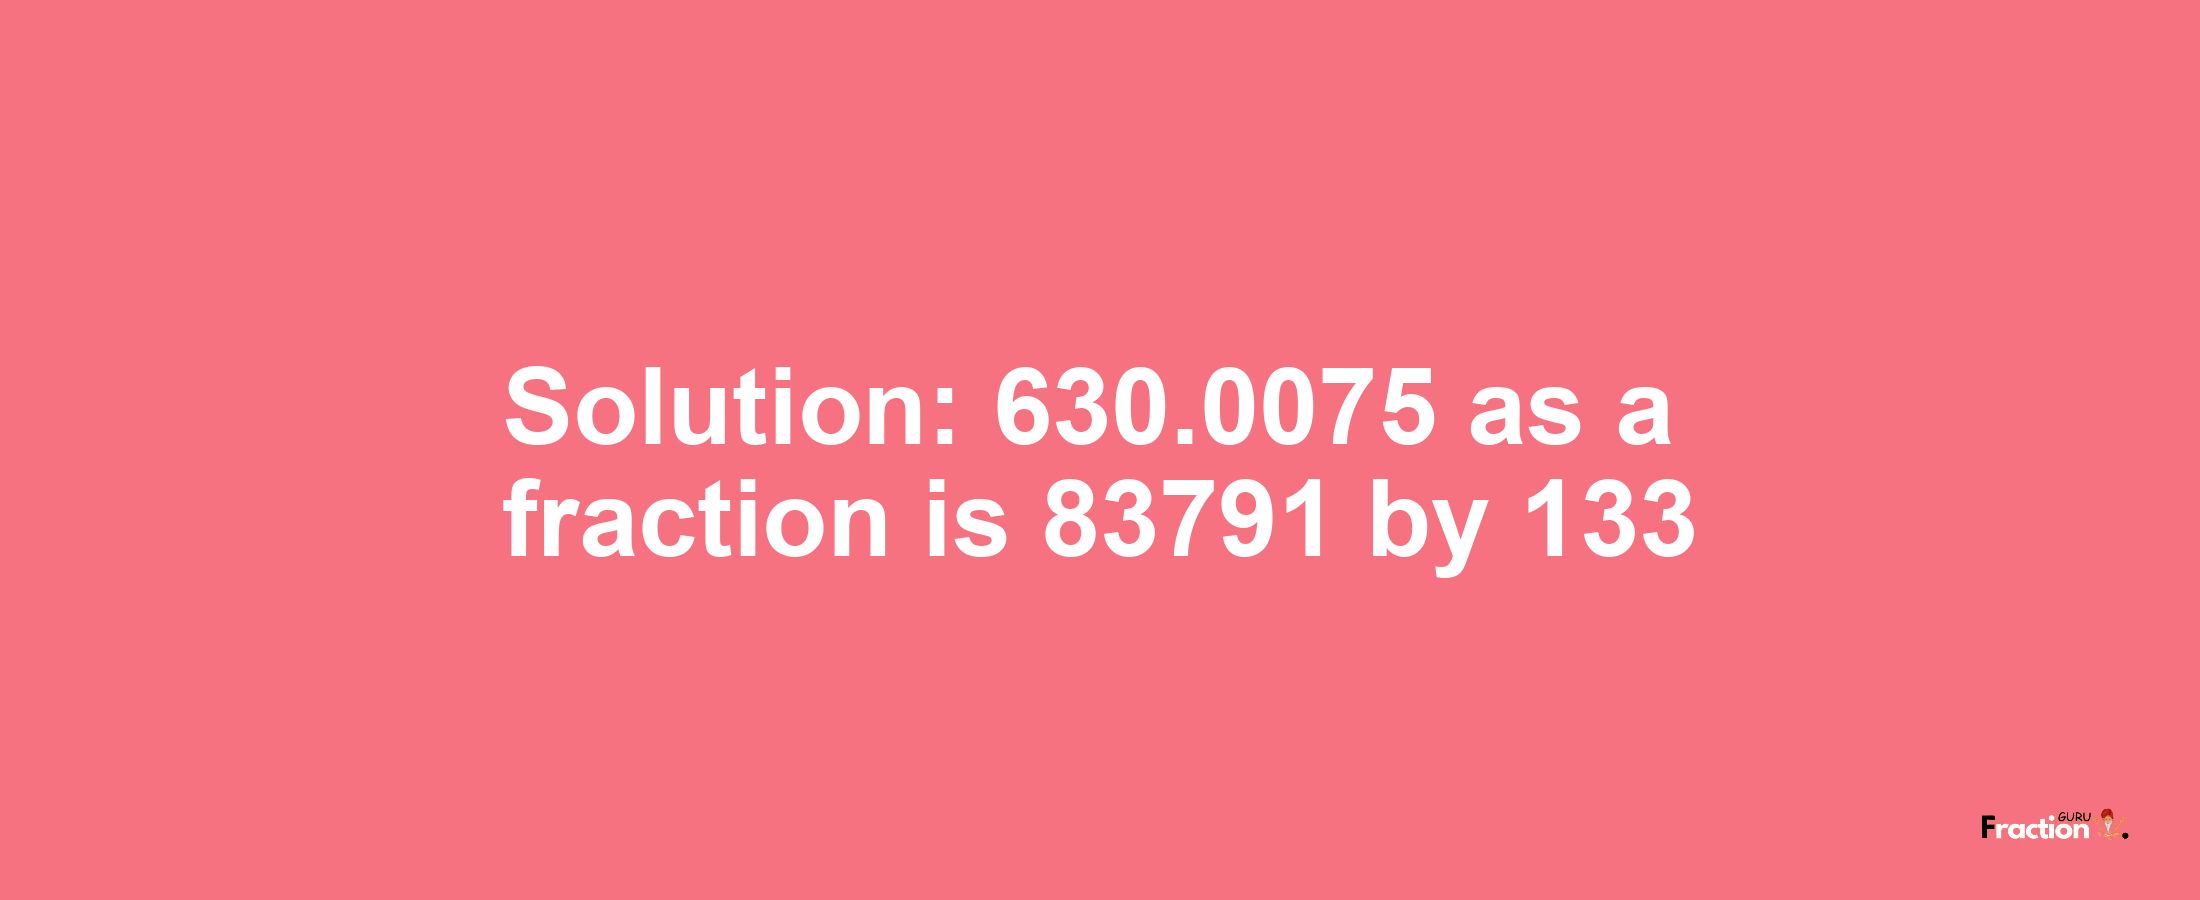 Solution:630.0075 as a fraction is 83791/133